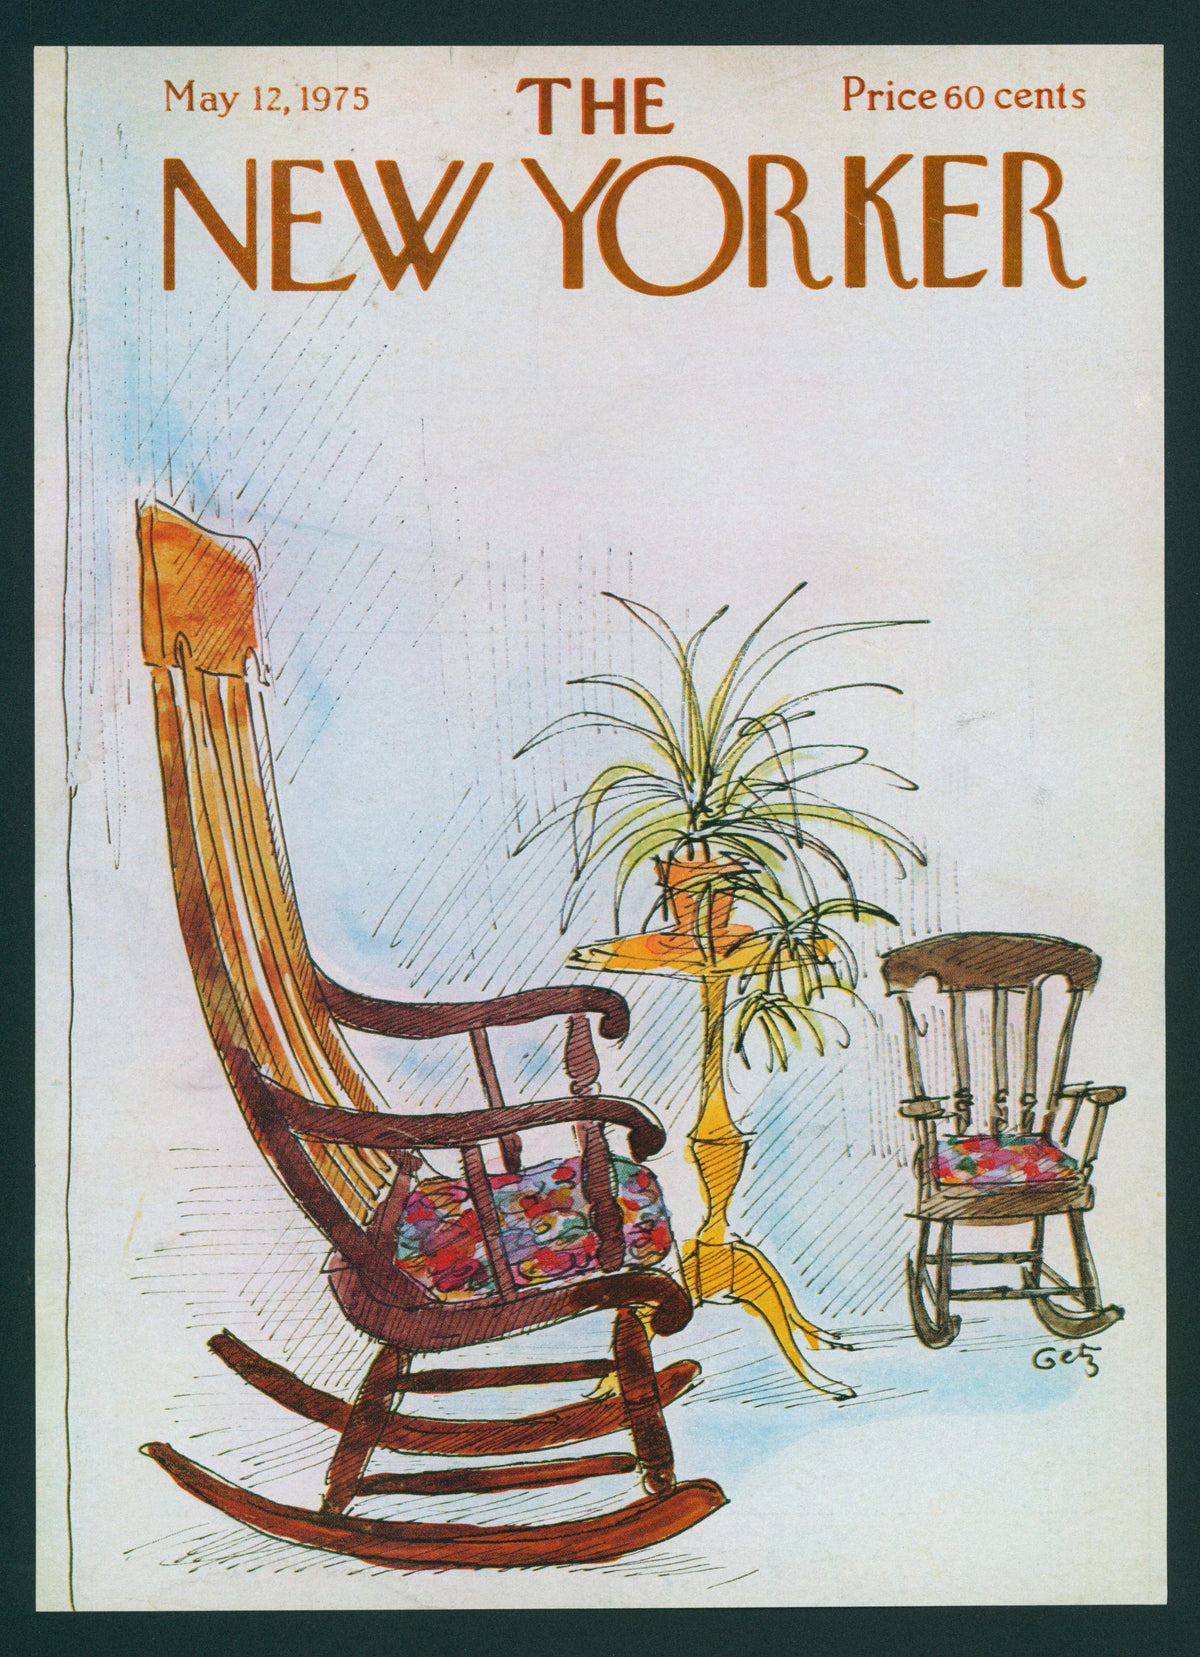 Rocking Chair- The New Yorker - Authentic Vintage Antique Print